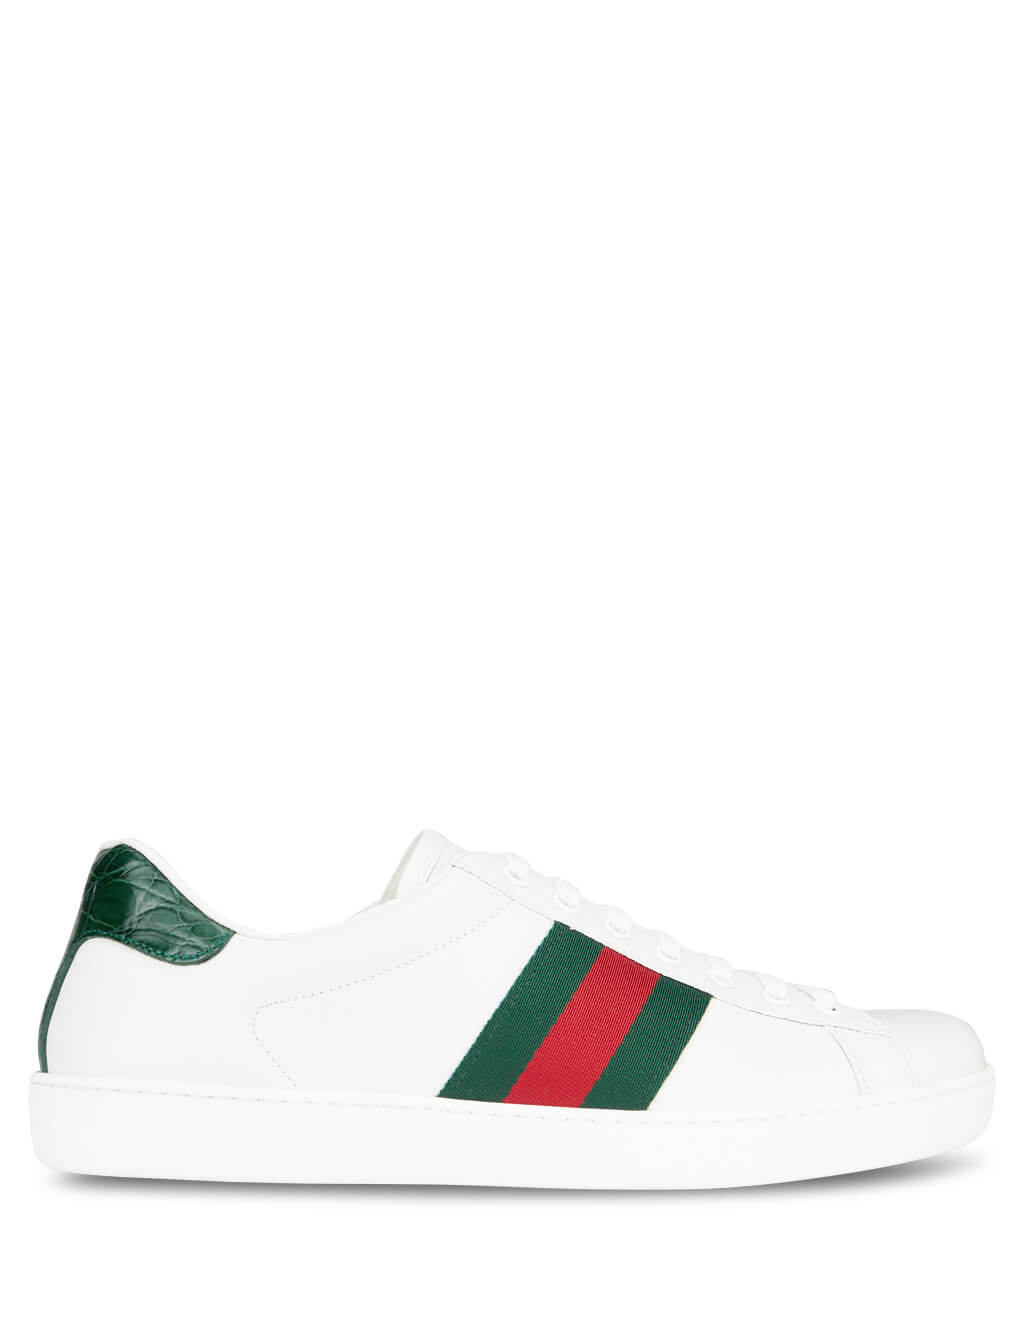 Gucci Men's White Ace Leather Sneakers 